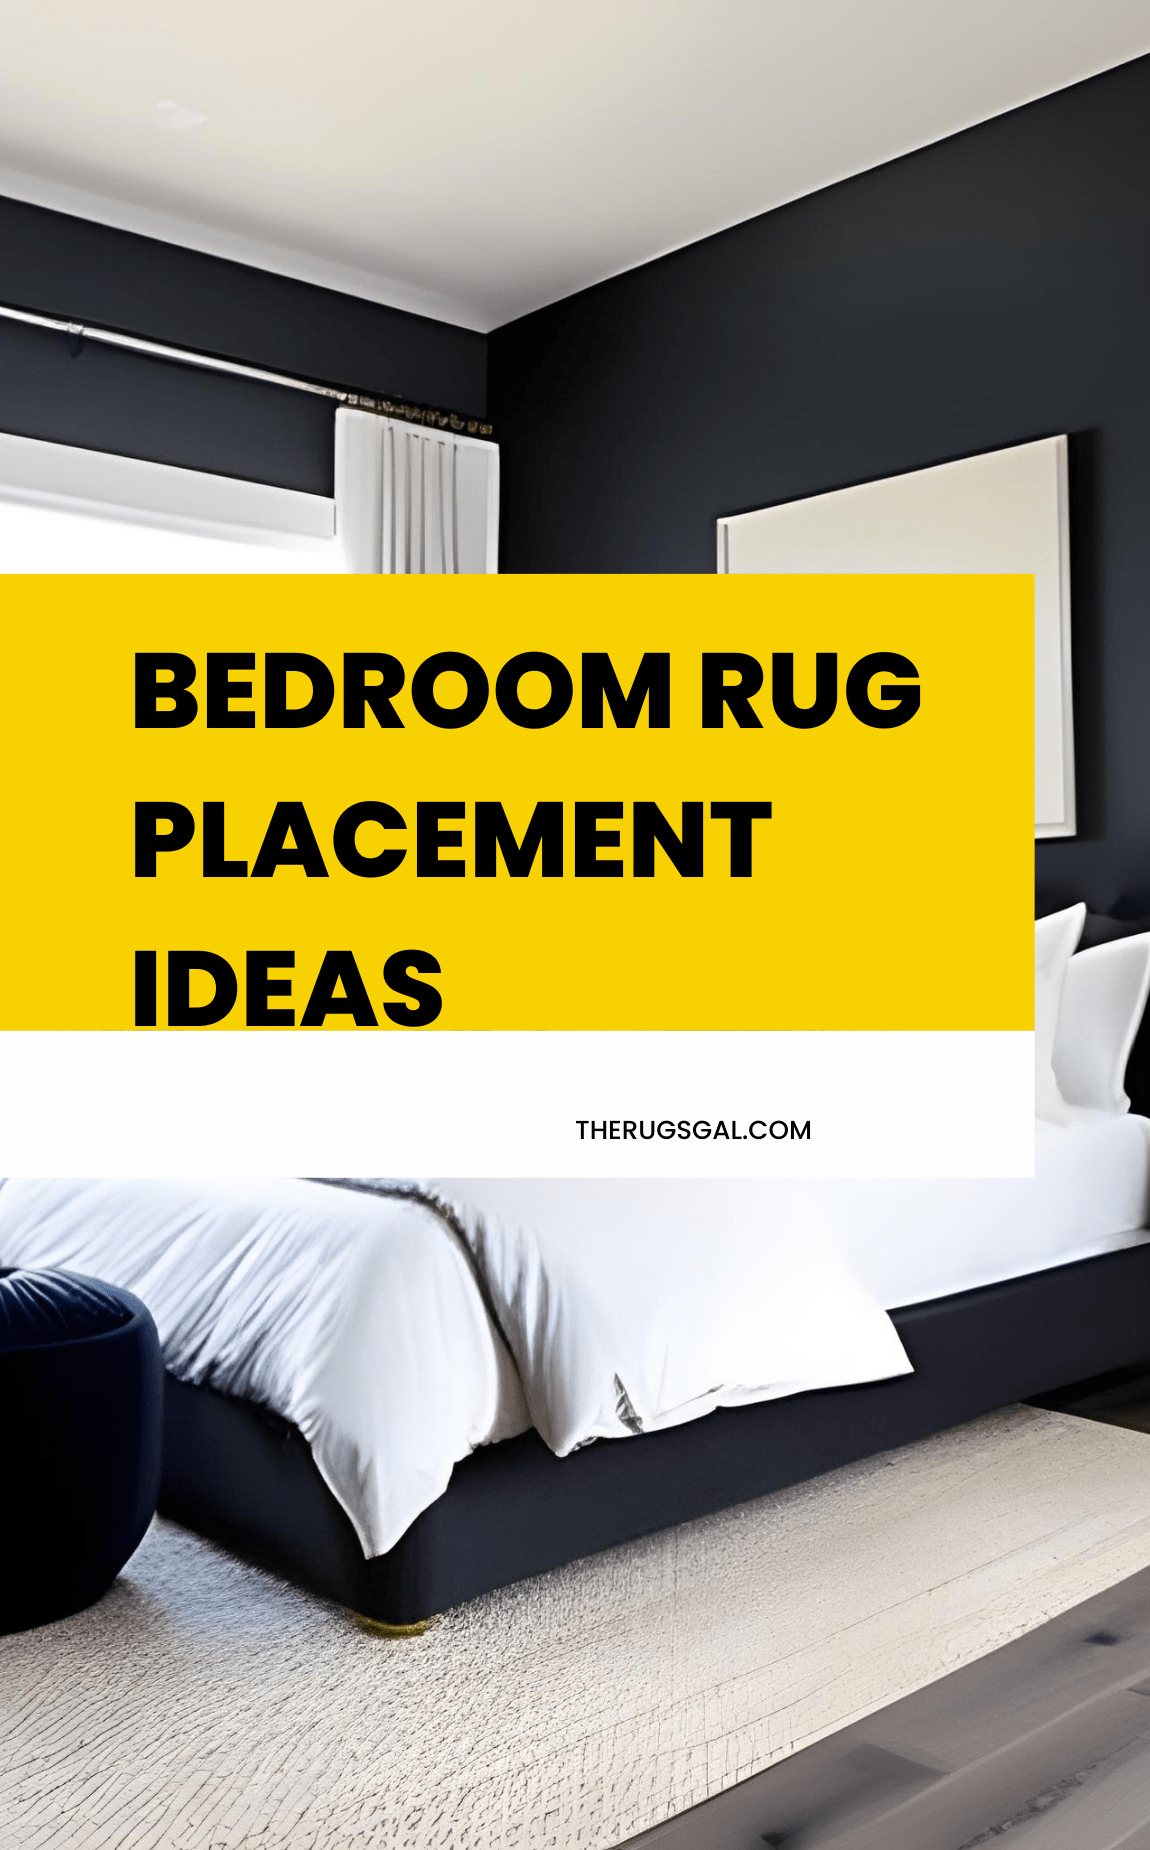 Bedroom Rug Placement Ideas